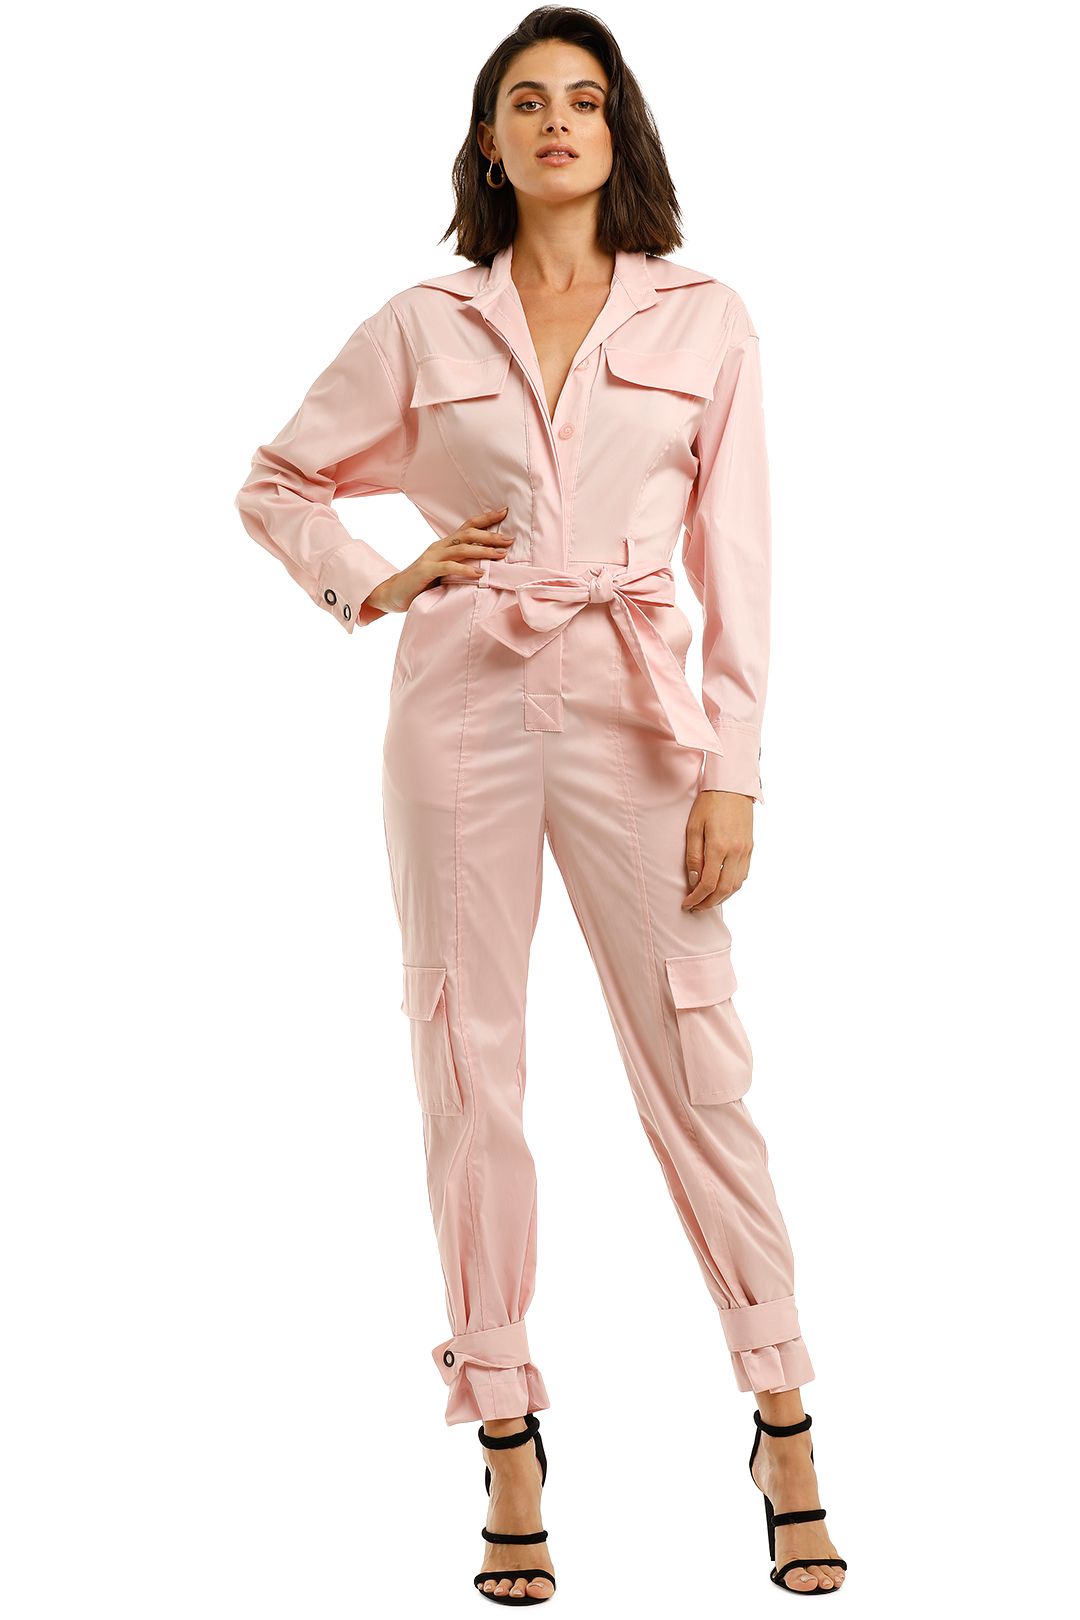 Manning-Cartell-Victory-Lap-Jumpsuit-Pink-Front